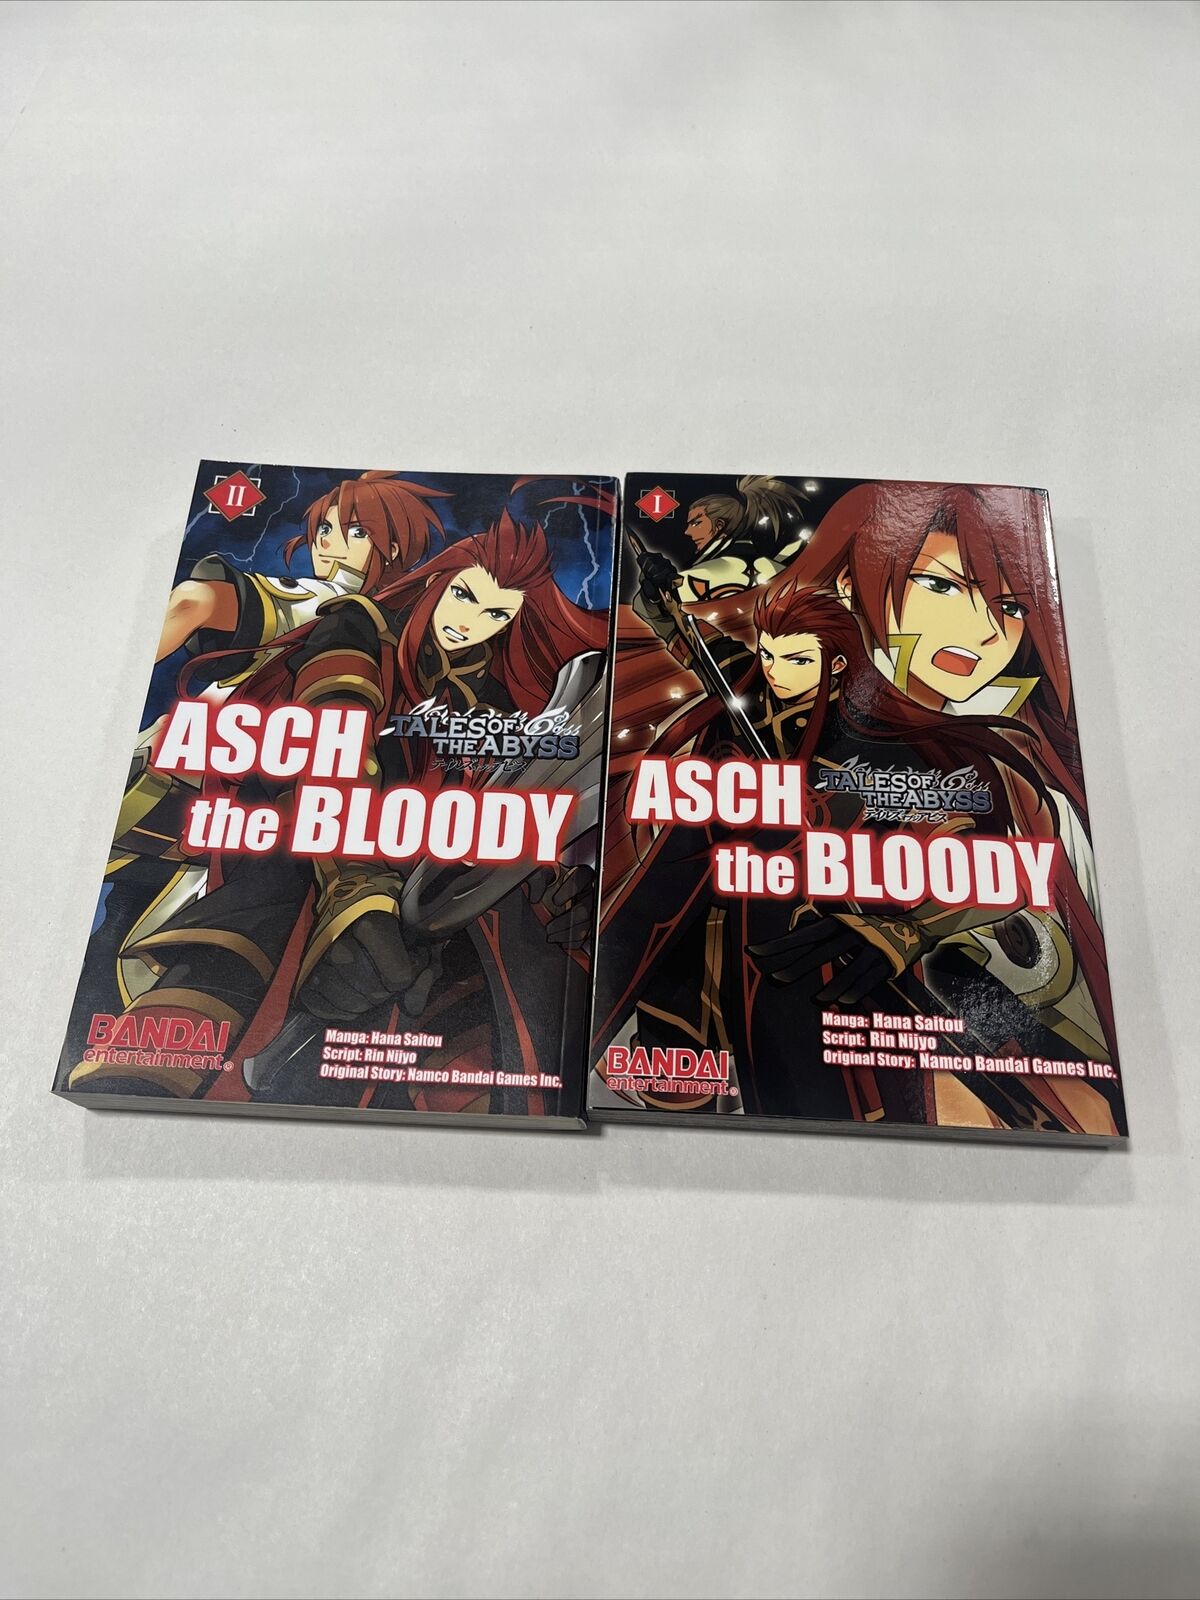 Tales of the Abyss Asch the Bloody Volume 1 and volume 2